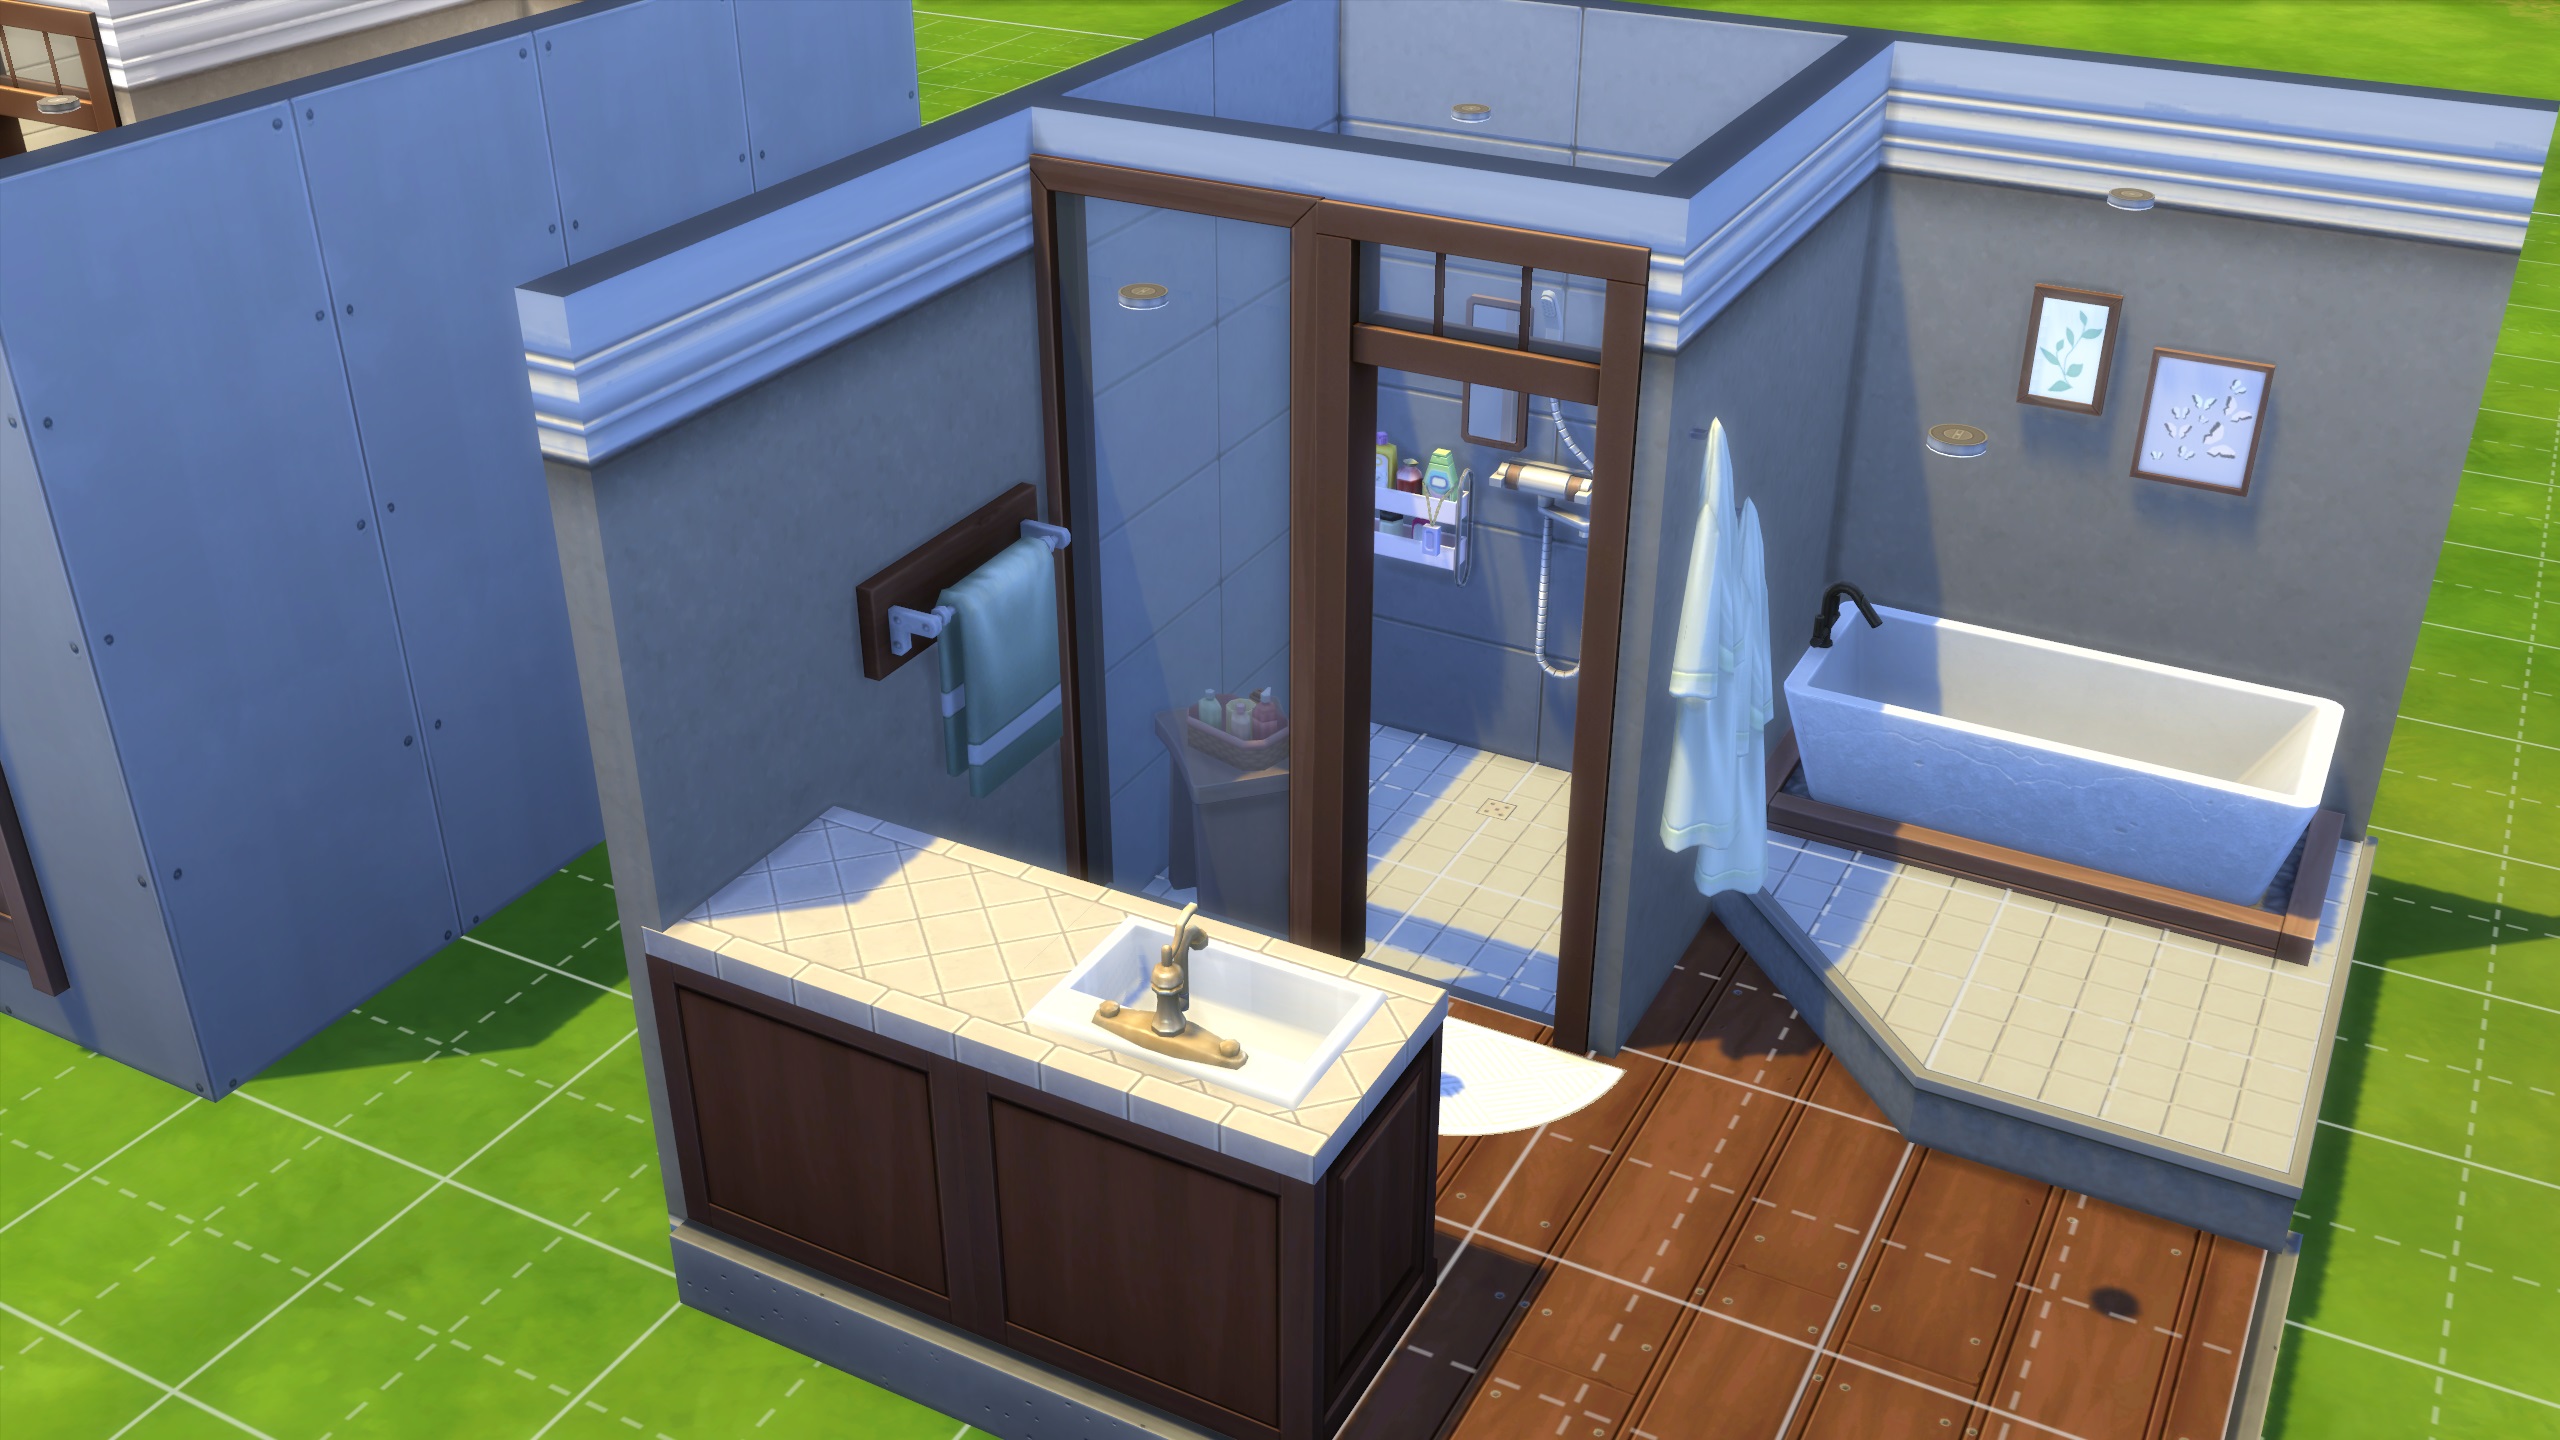 The Sims 4 build tips - A small bathroom design with a step up platform leading to a tub and a shower that steps down